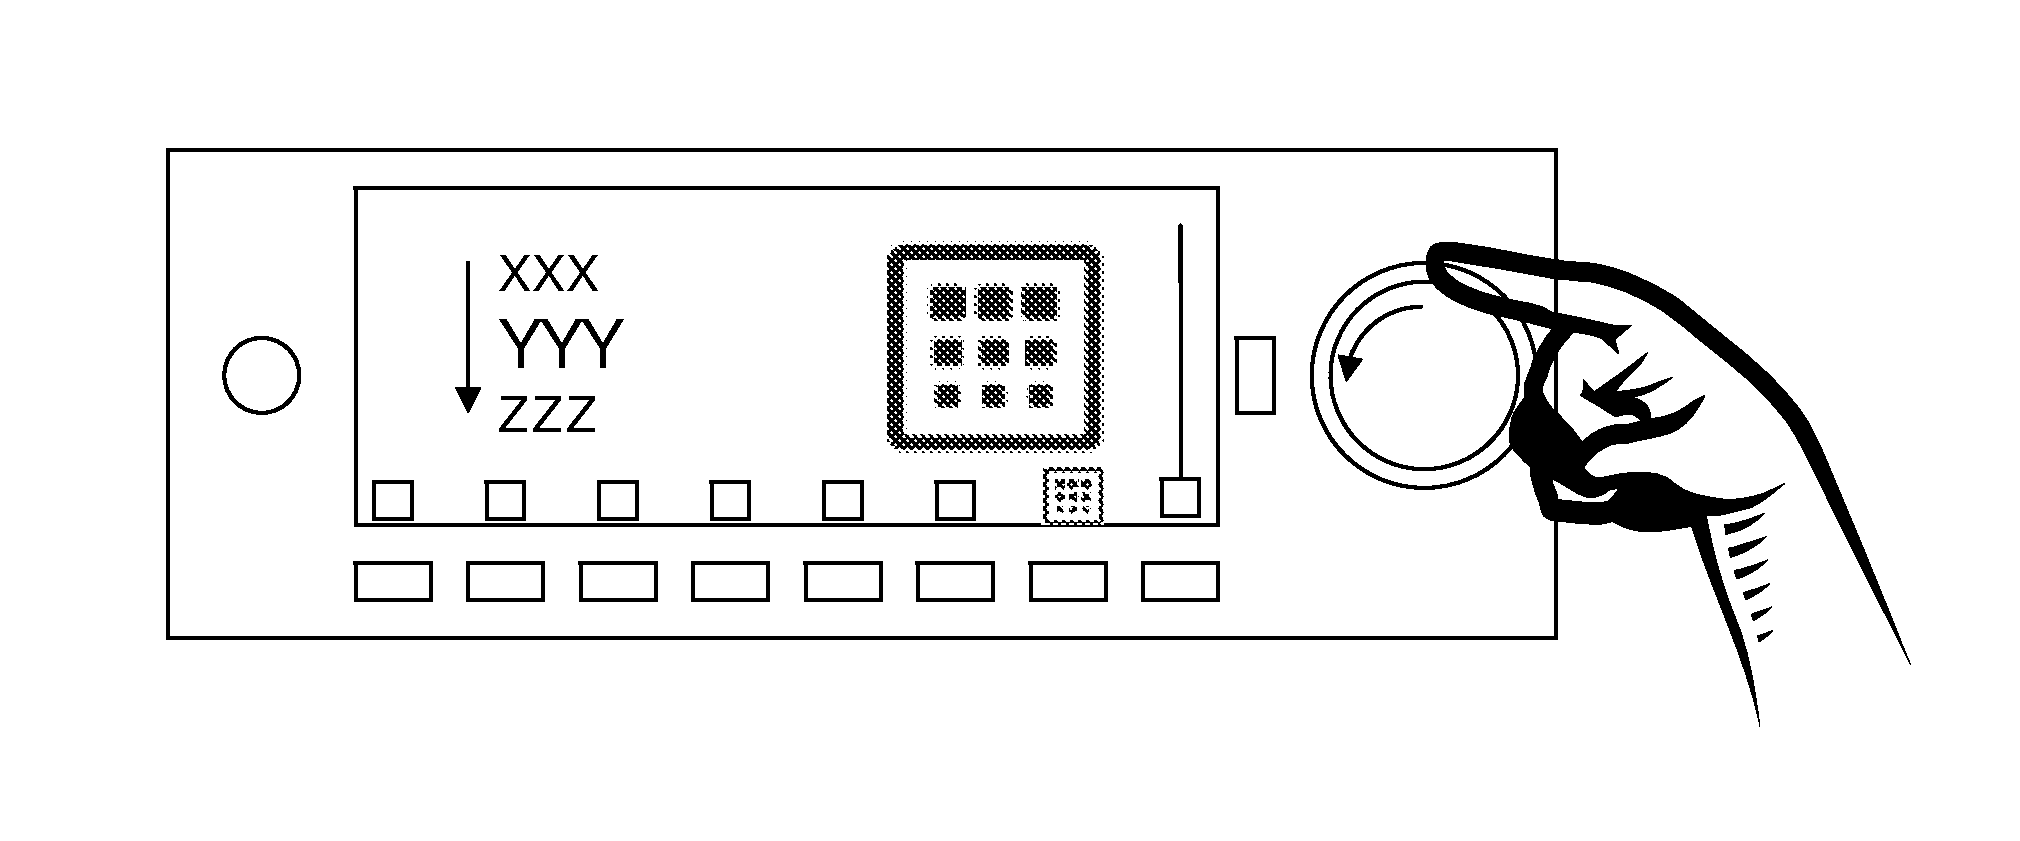 Control interface for household appliances